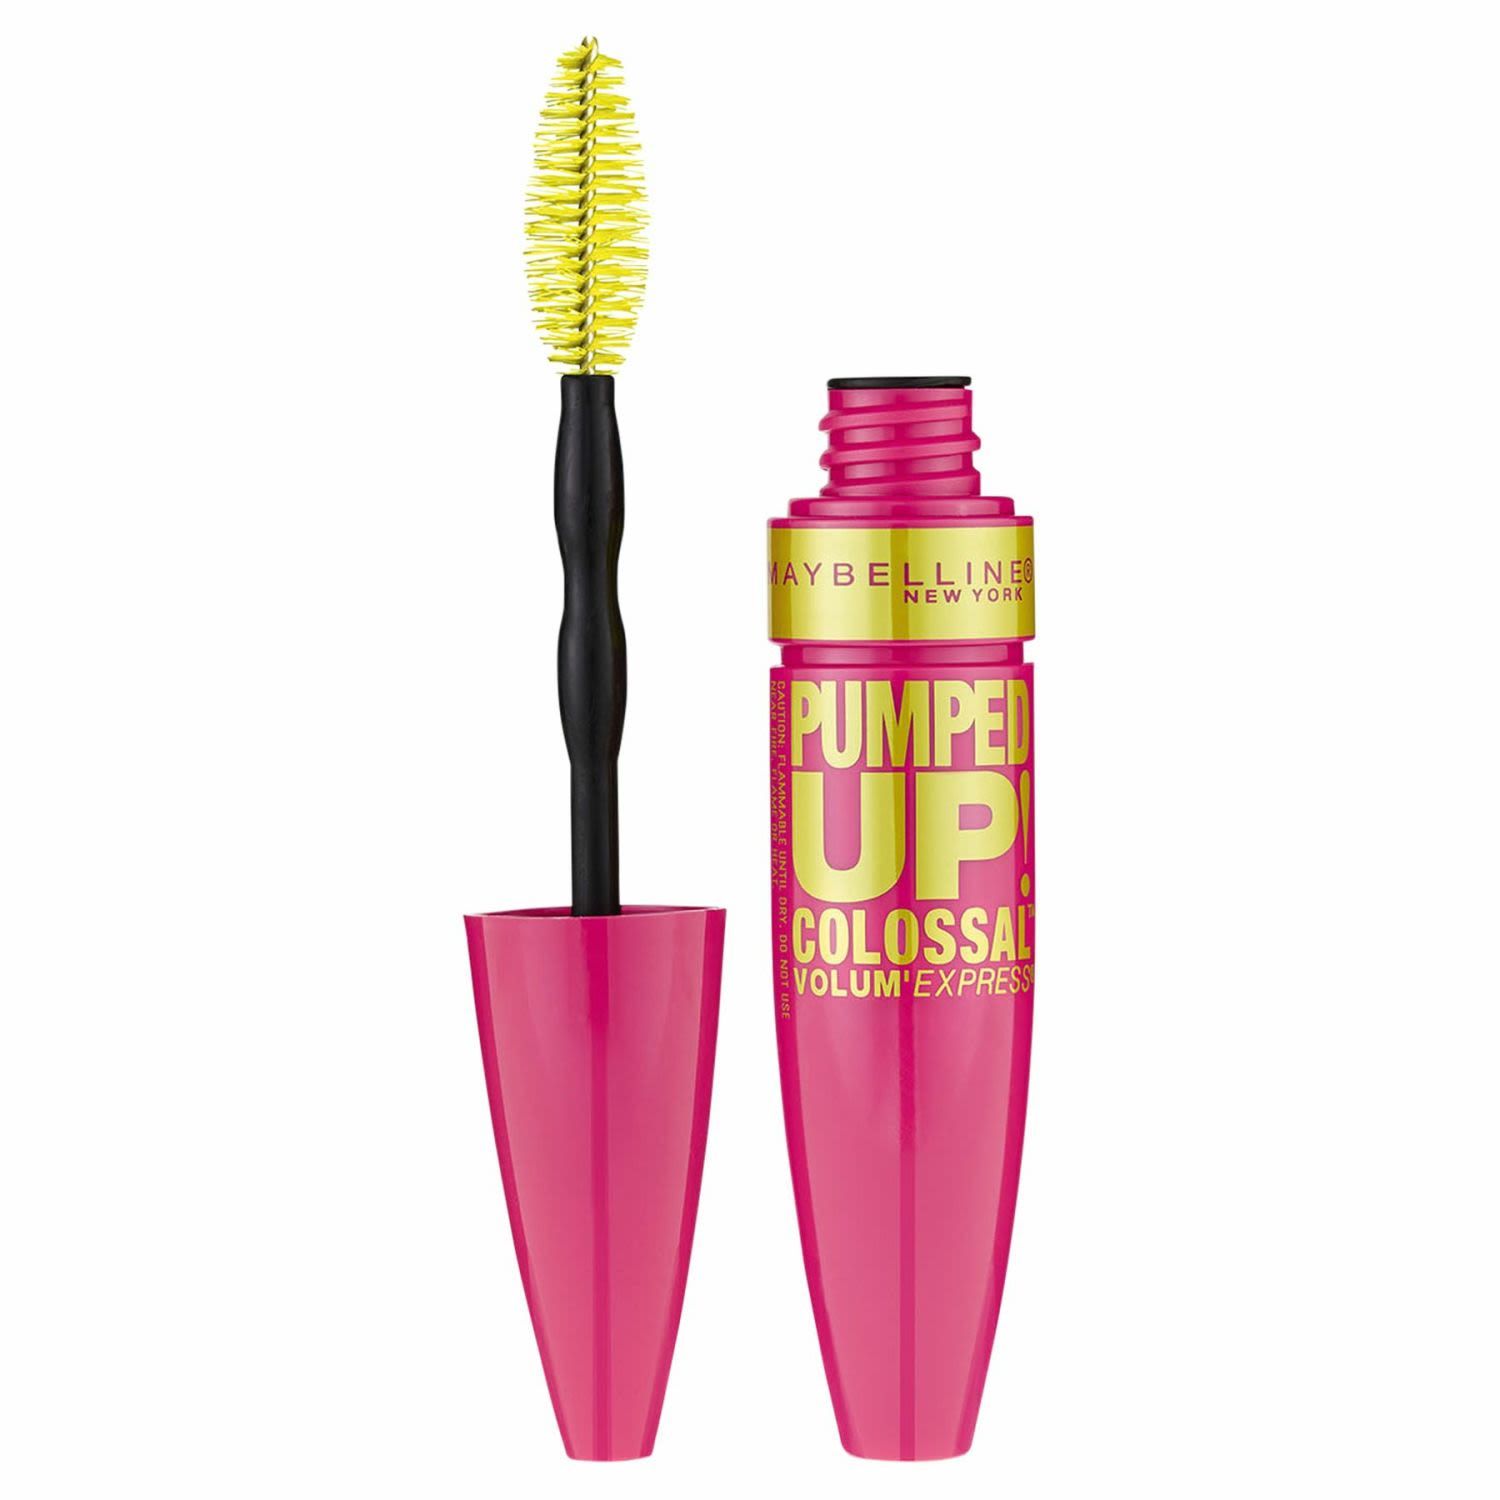 Maybelline's biggest brush and collagen formula amplify lashes with up to 16X the volume. Our double shot mascara brush volumizes with an extra shot of the plumping formula.<br /> <br />